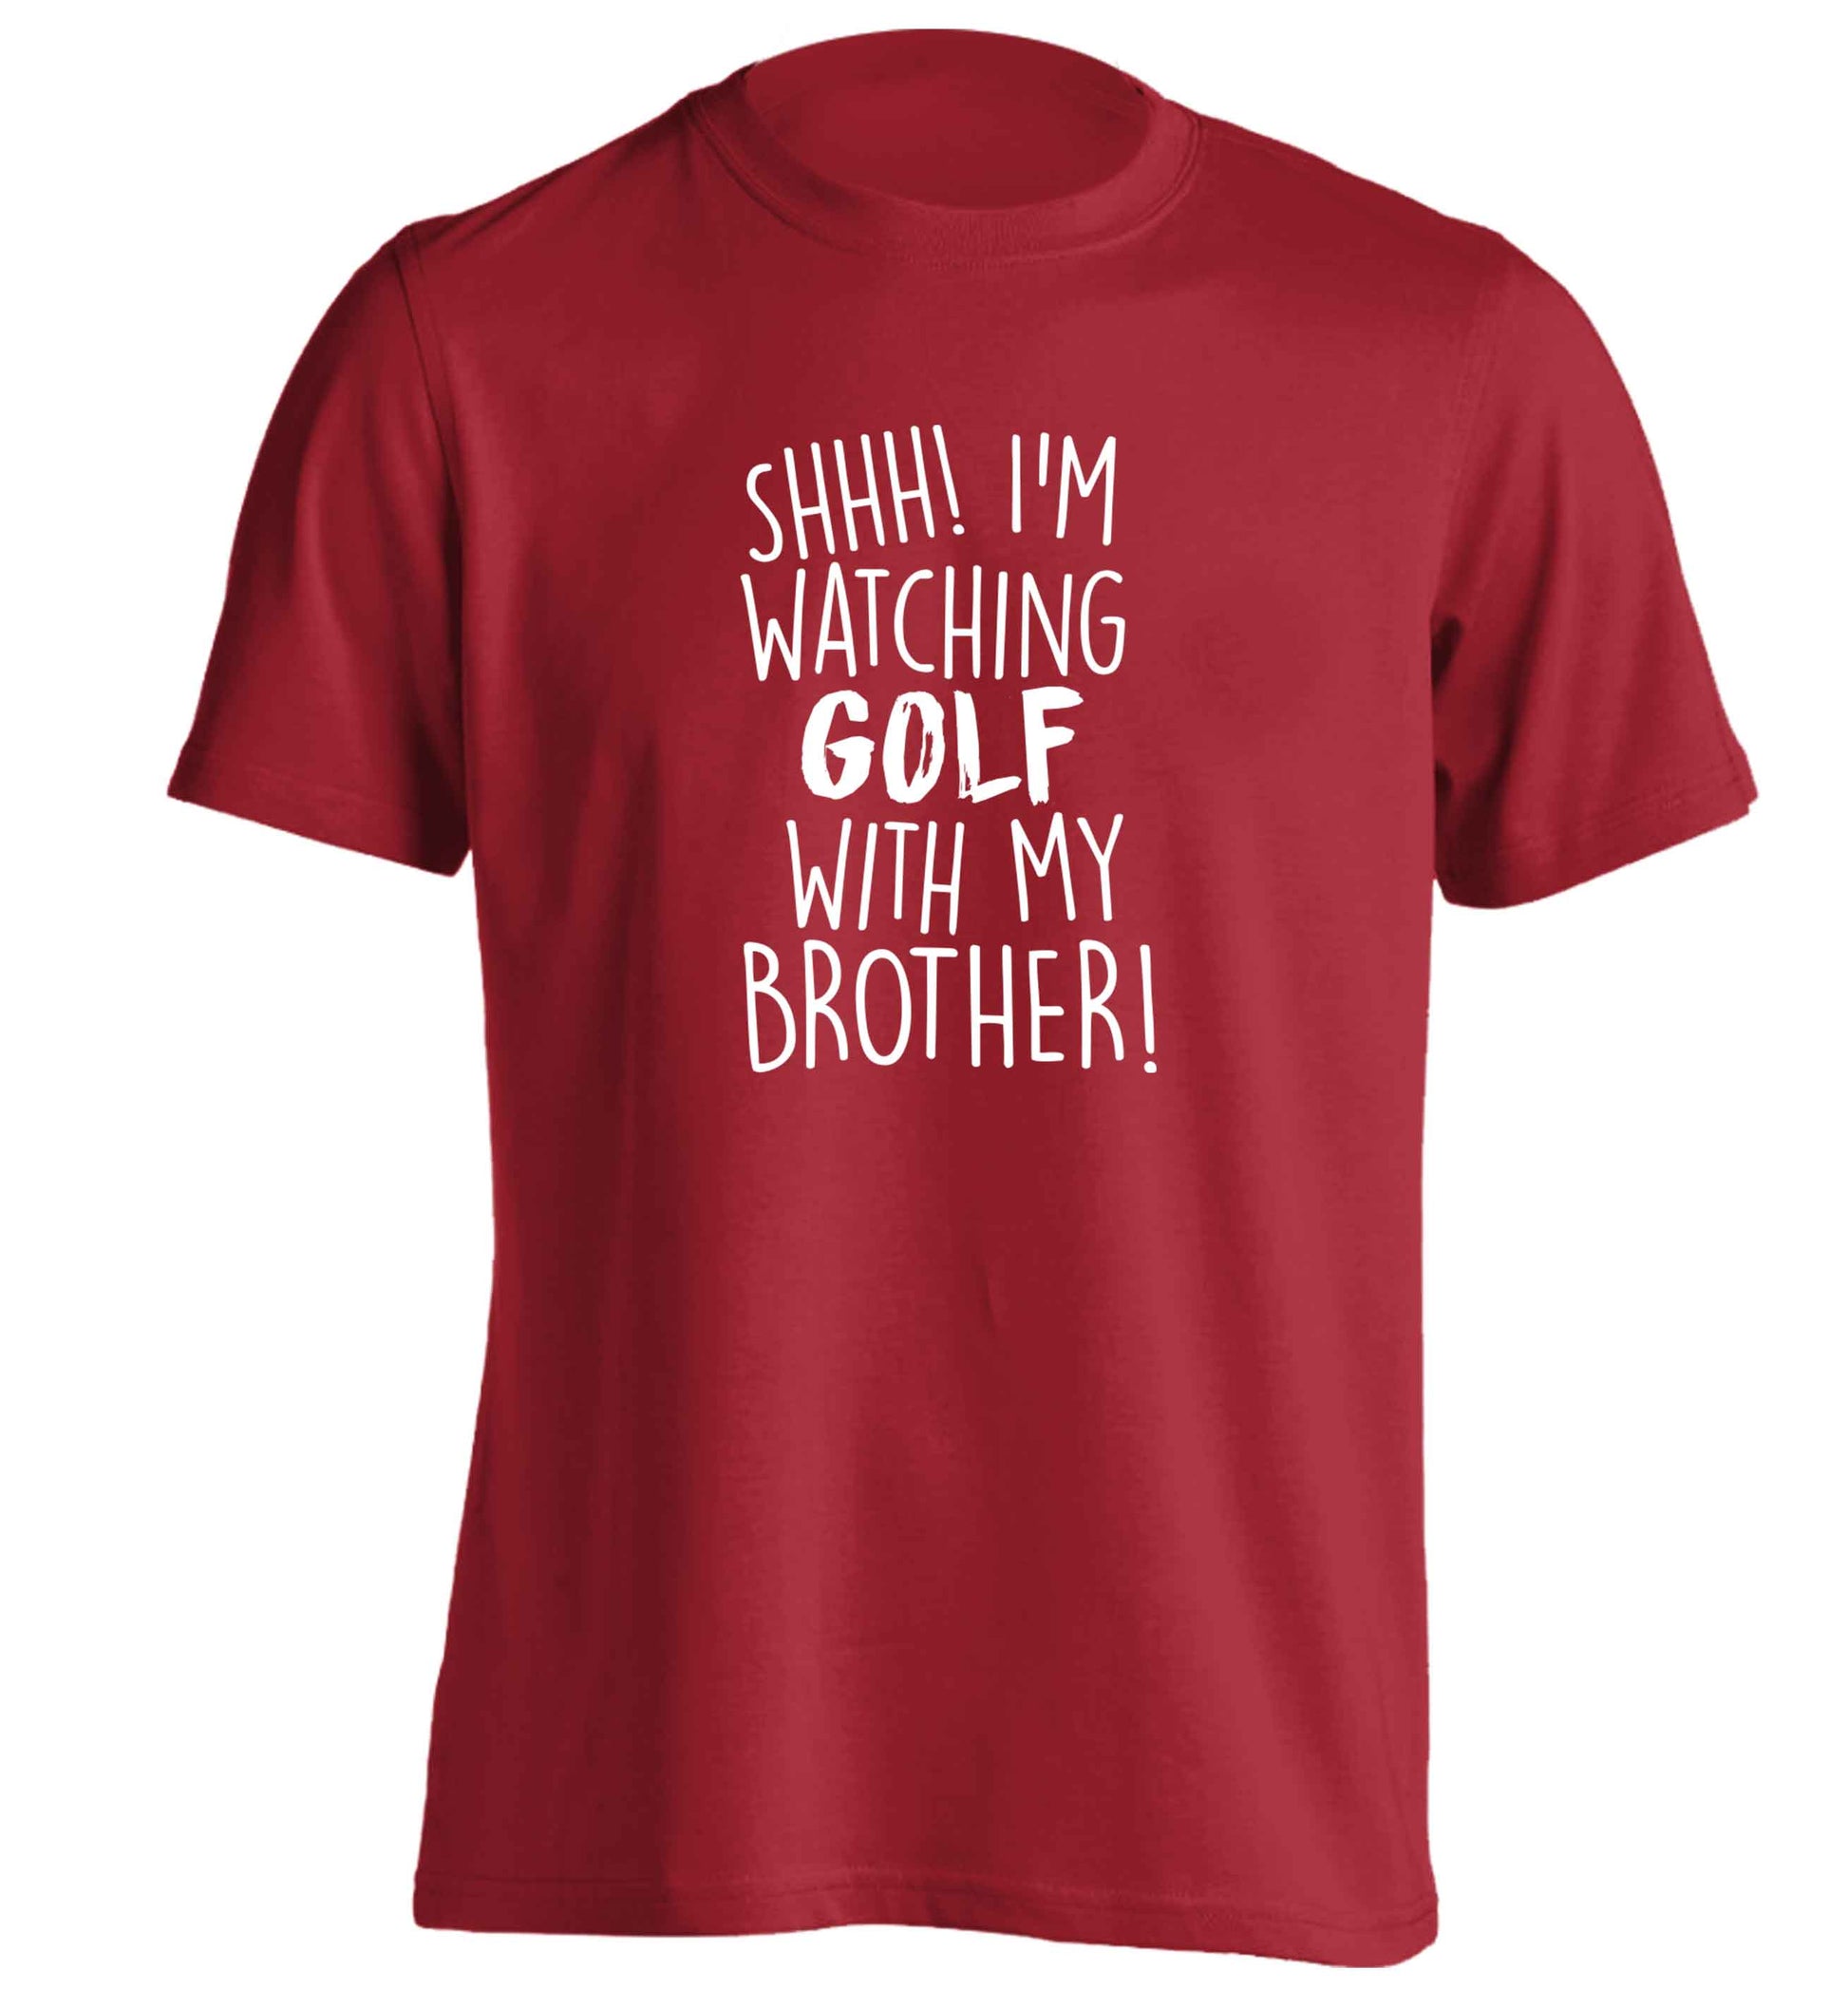 Shh I'm watching golf with my brother adults unisex red Tshirt 2XL